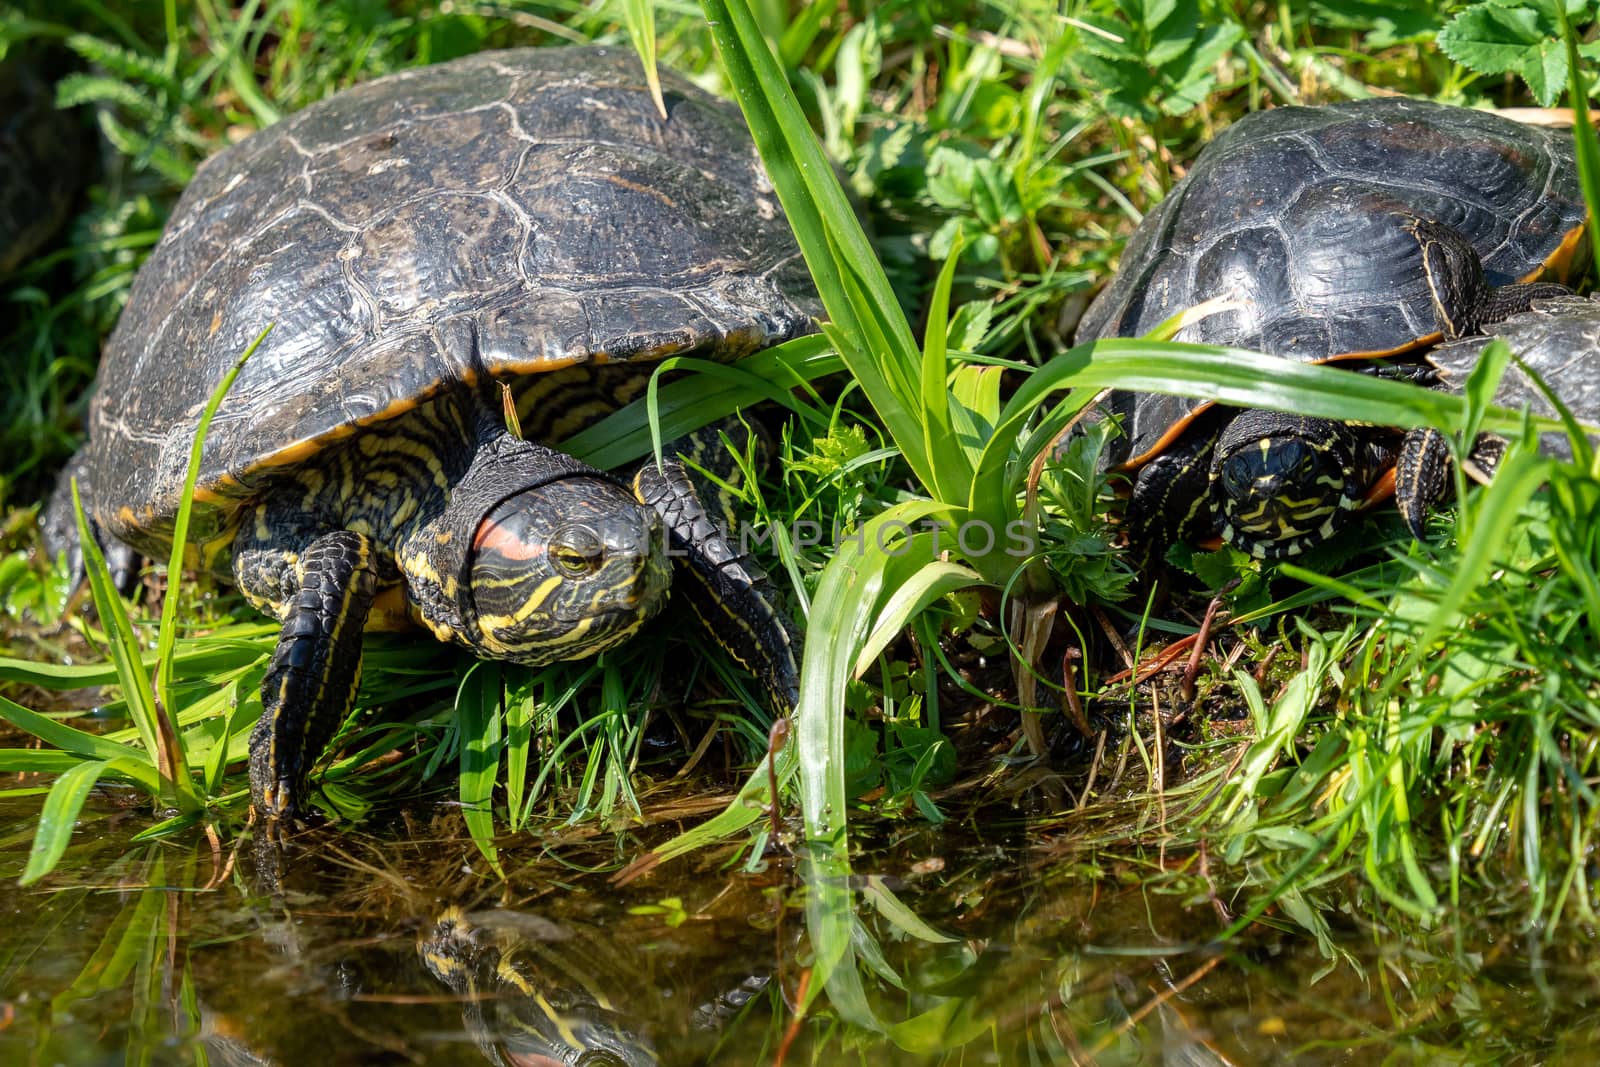 Turtles lying on the grass. Group of red-eared slider (Trachemys by xtrekx